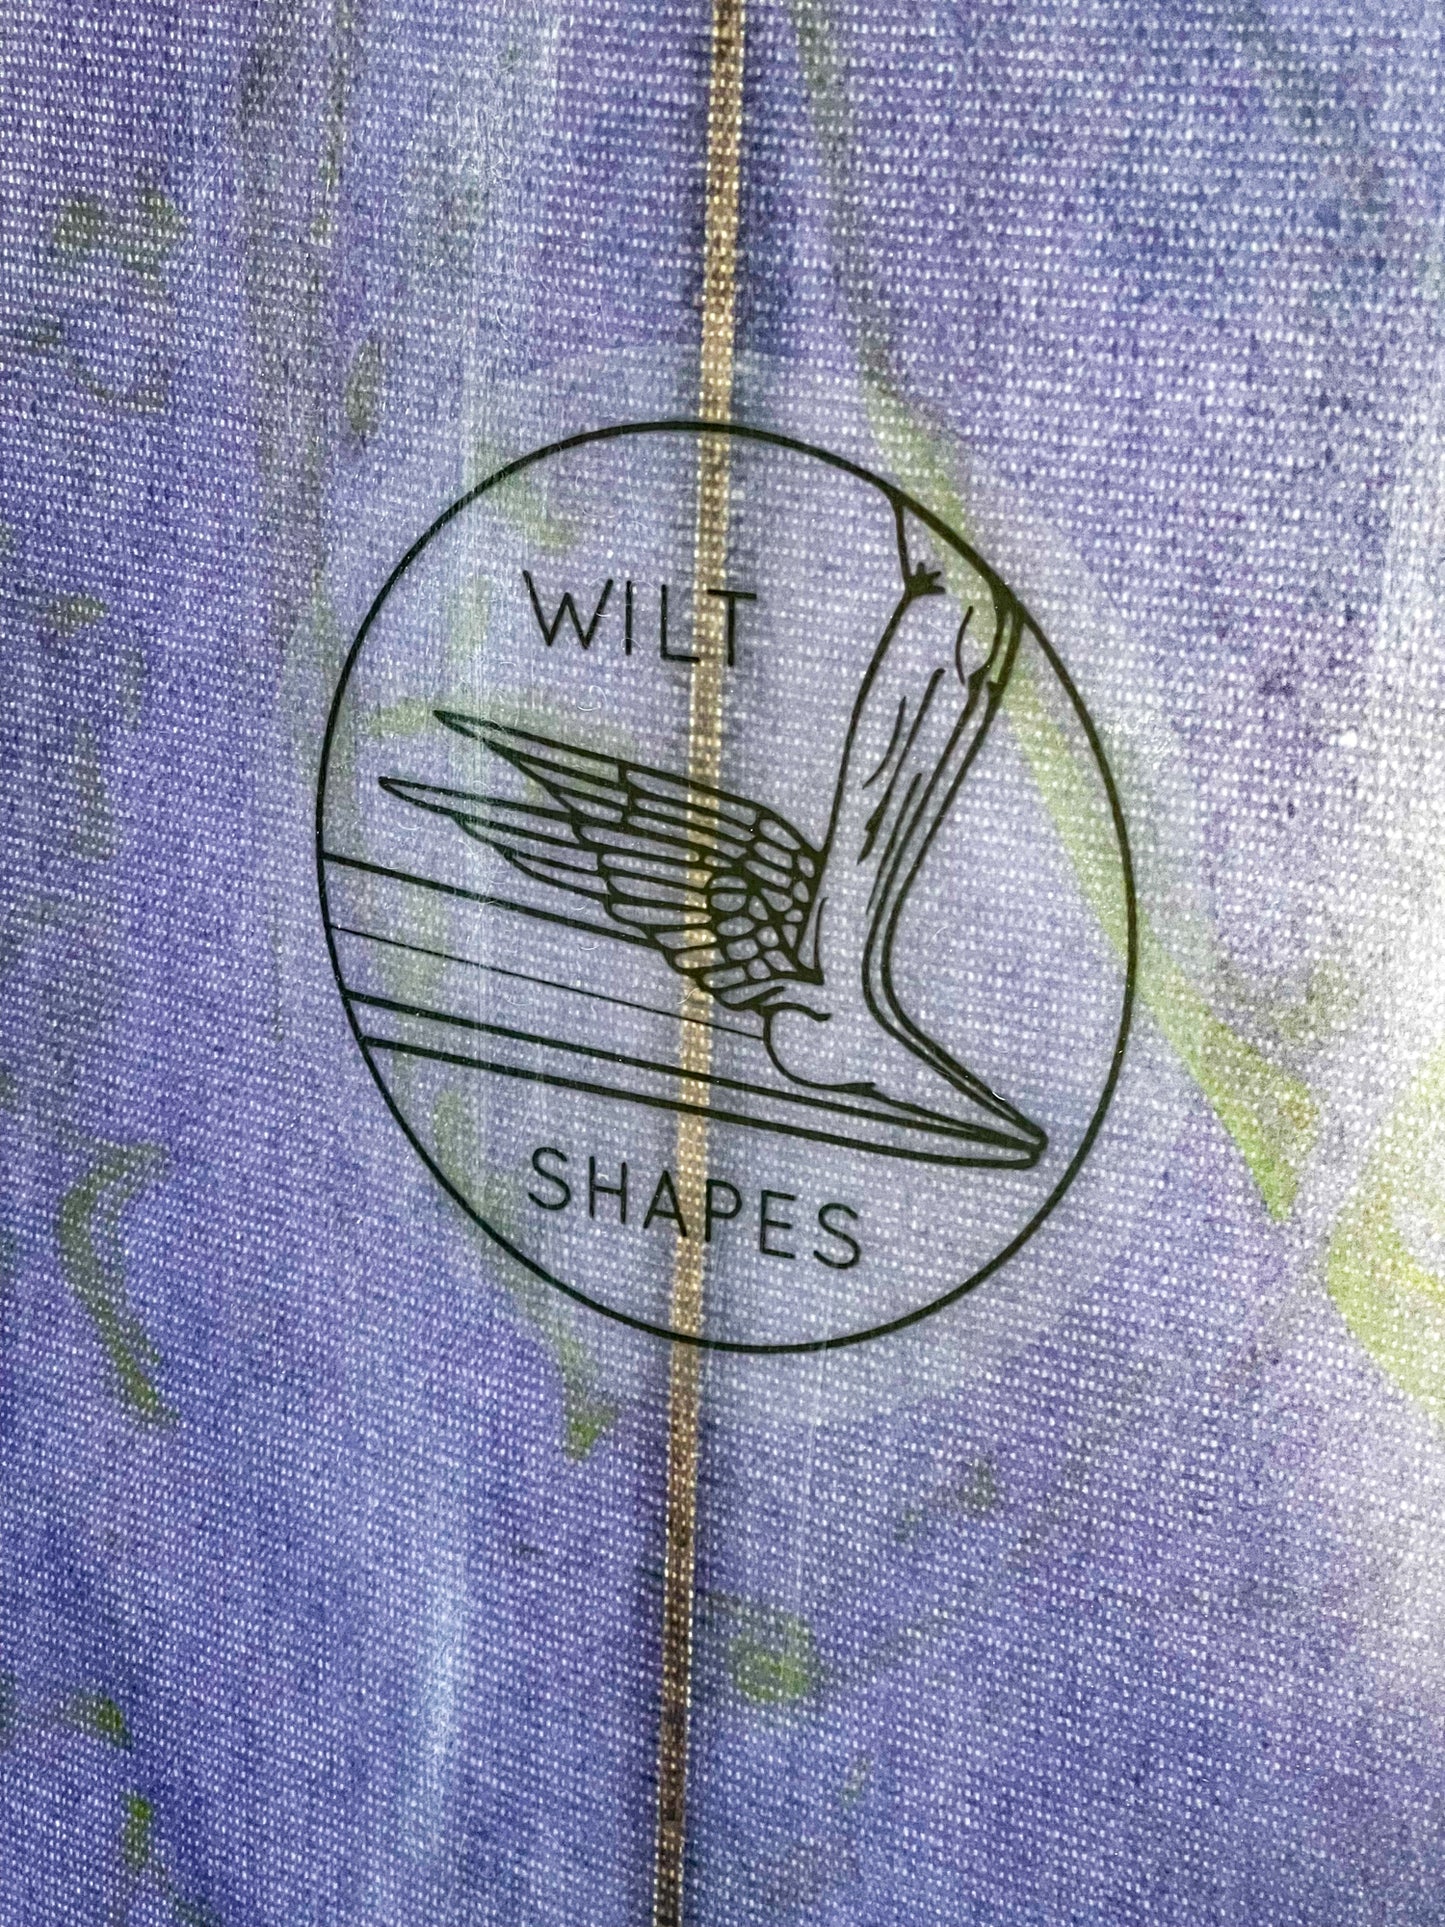 5' 10" Modern Fish surfboard by Wilt Shapes